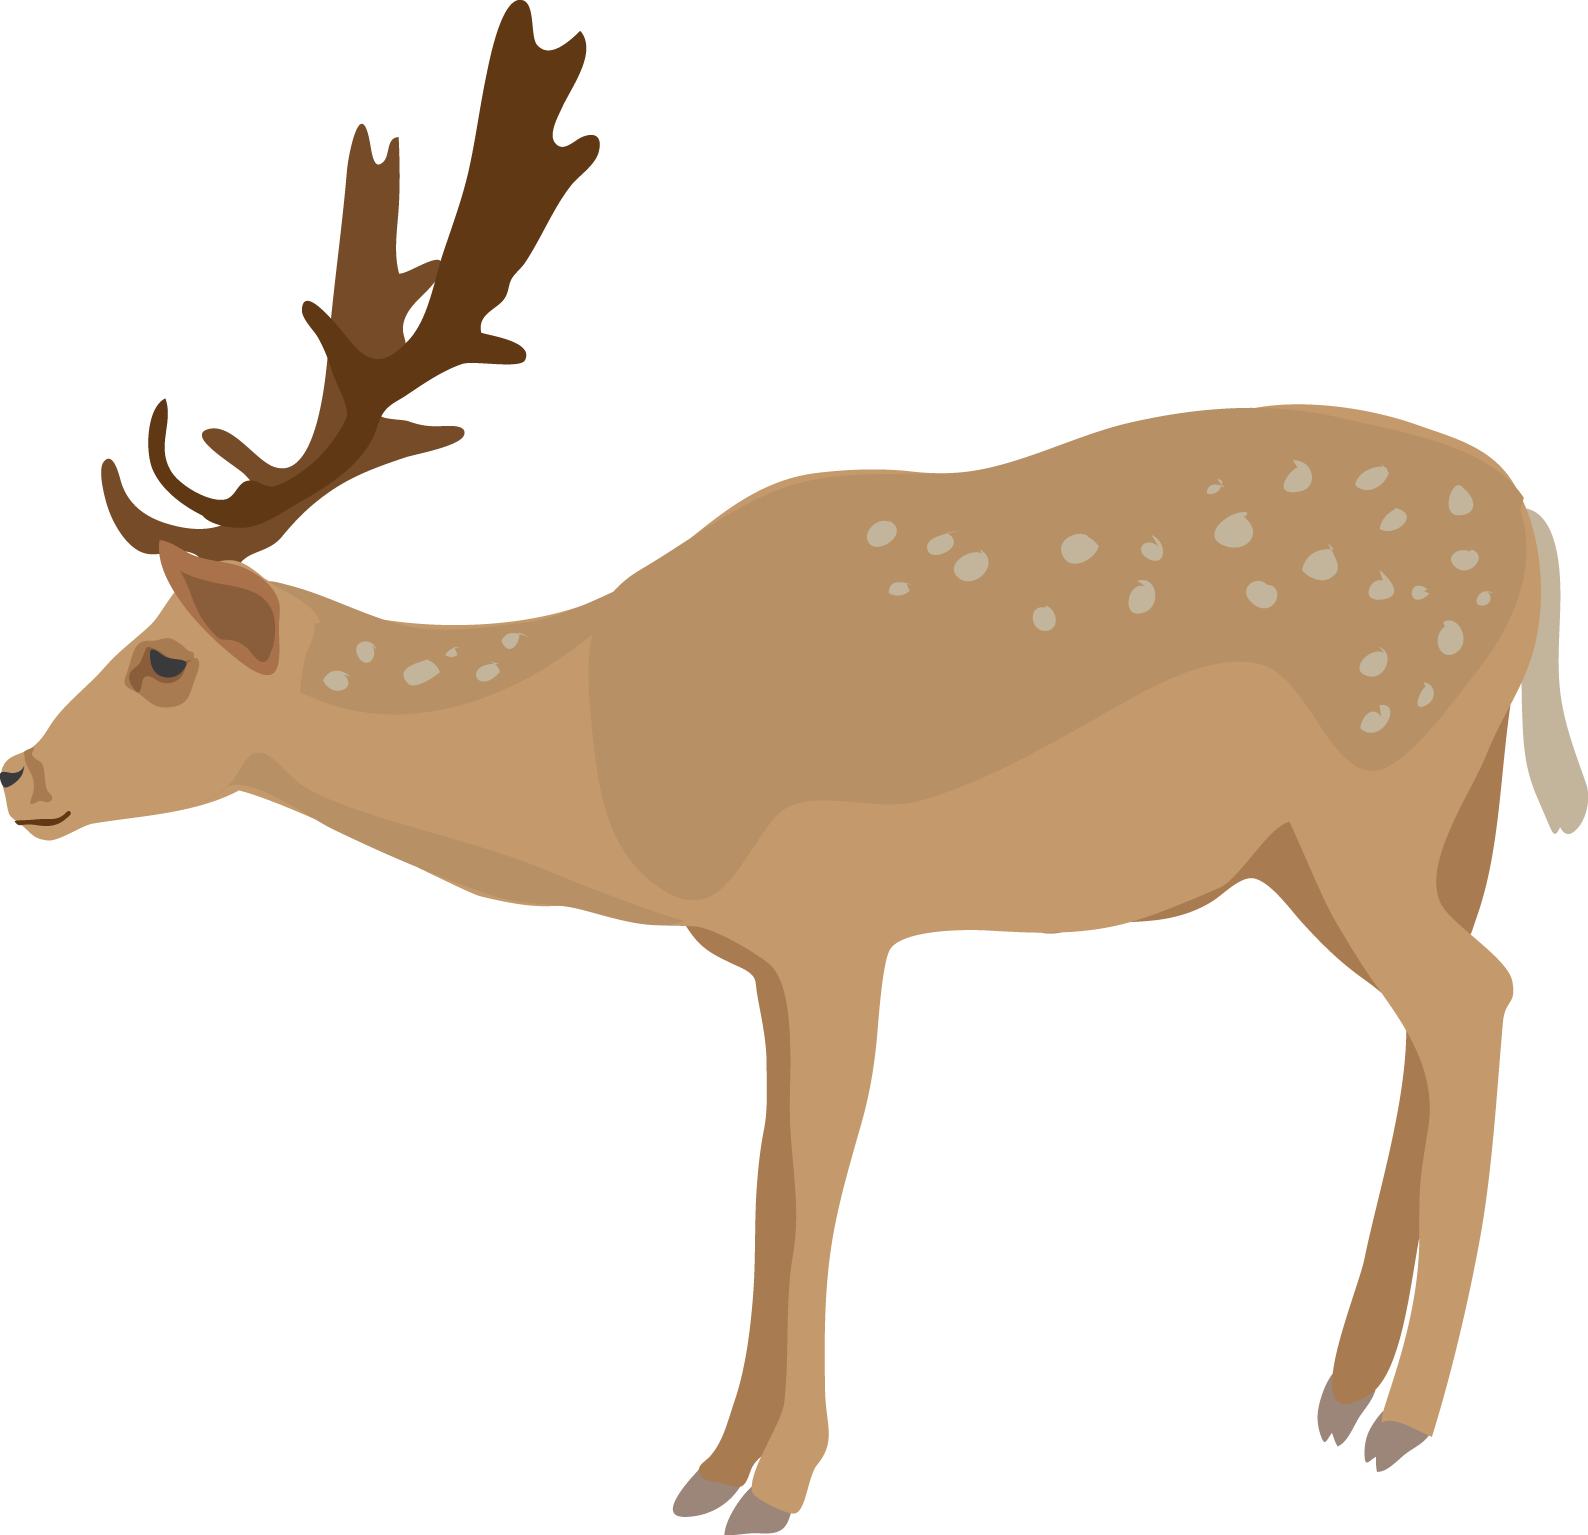 Cute baby deer clipart free images 6